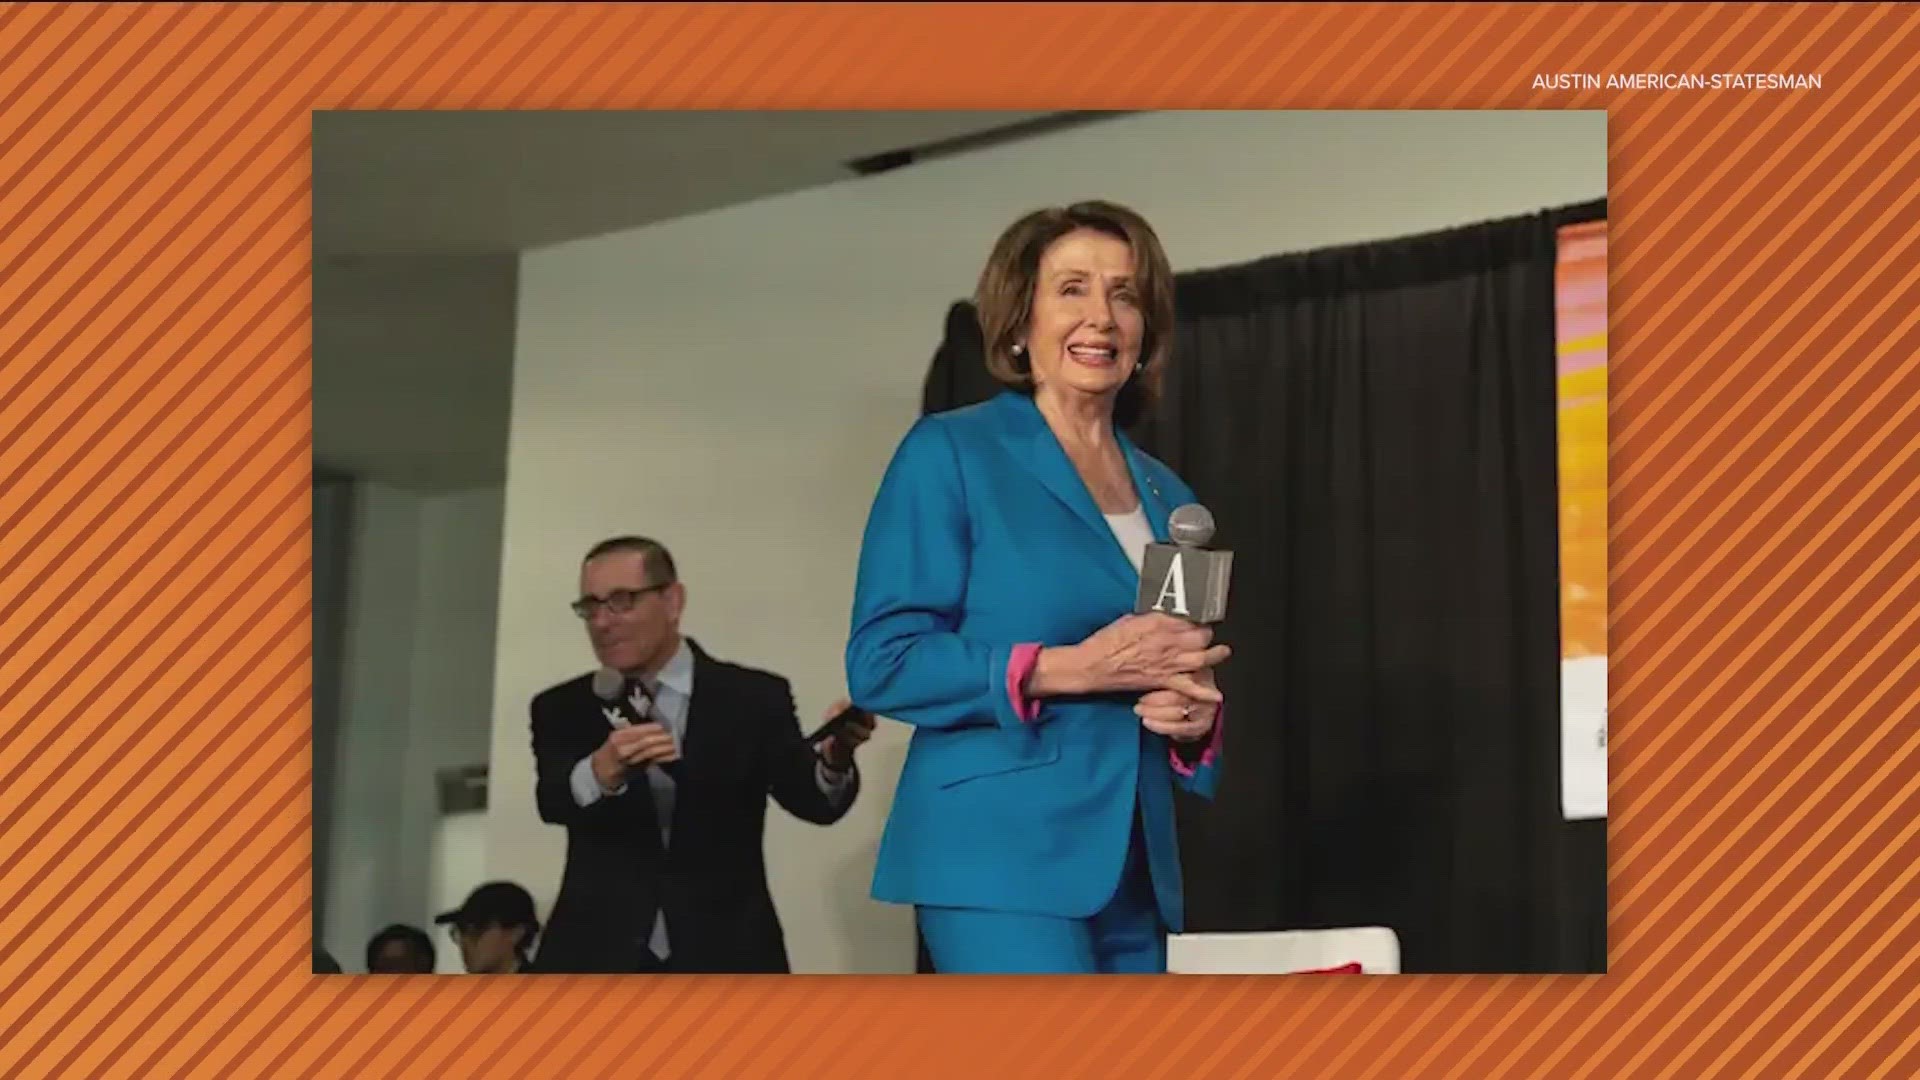 Nancy Pelosi, former speaker of the U.S. House, discussed the ongoing issues at the border this weakened during a panel at South by Southwest.